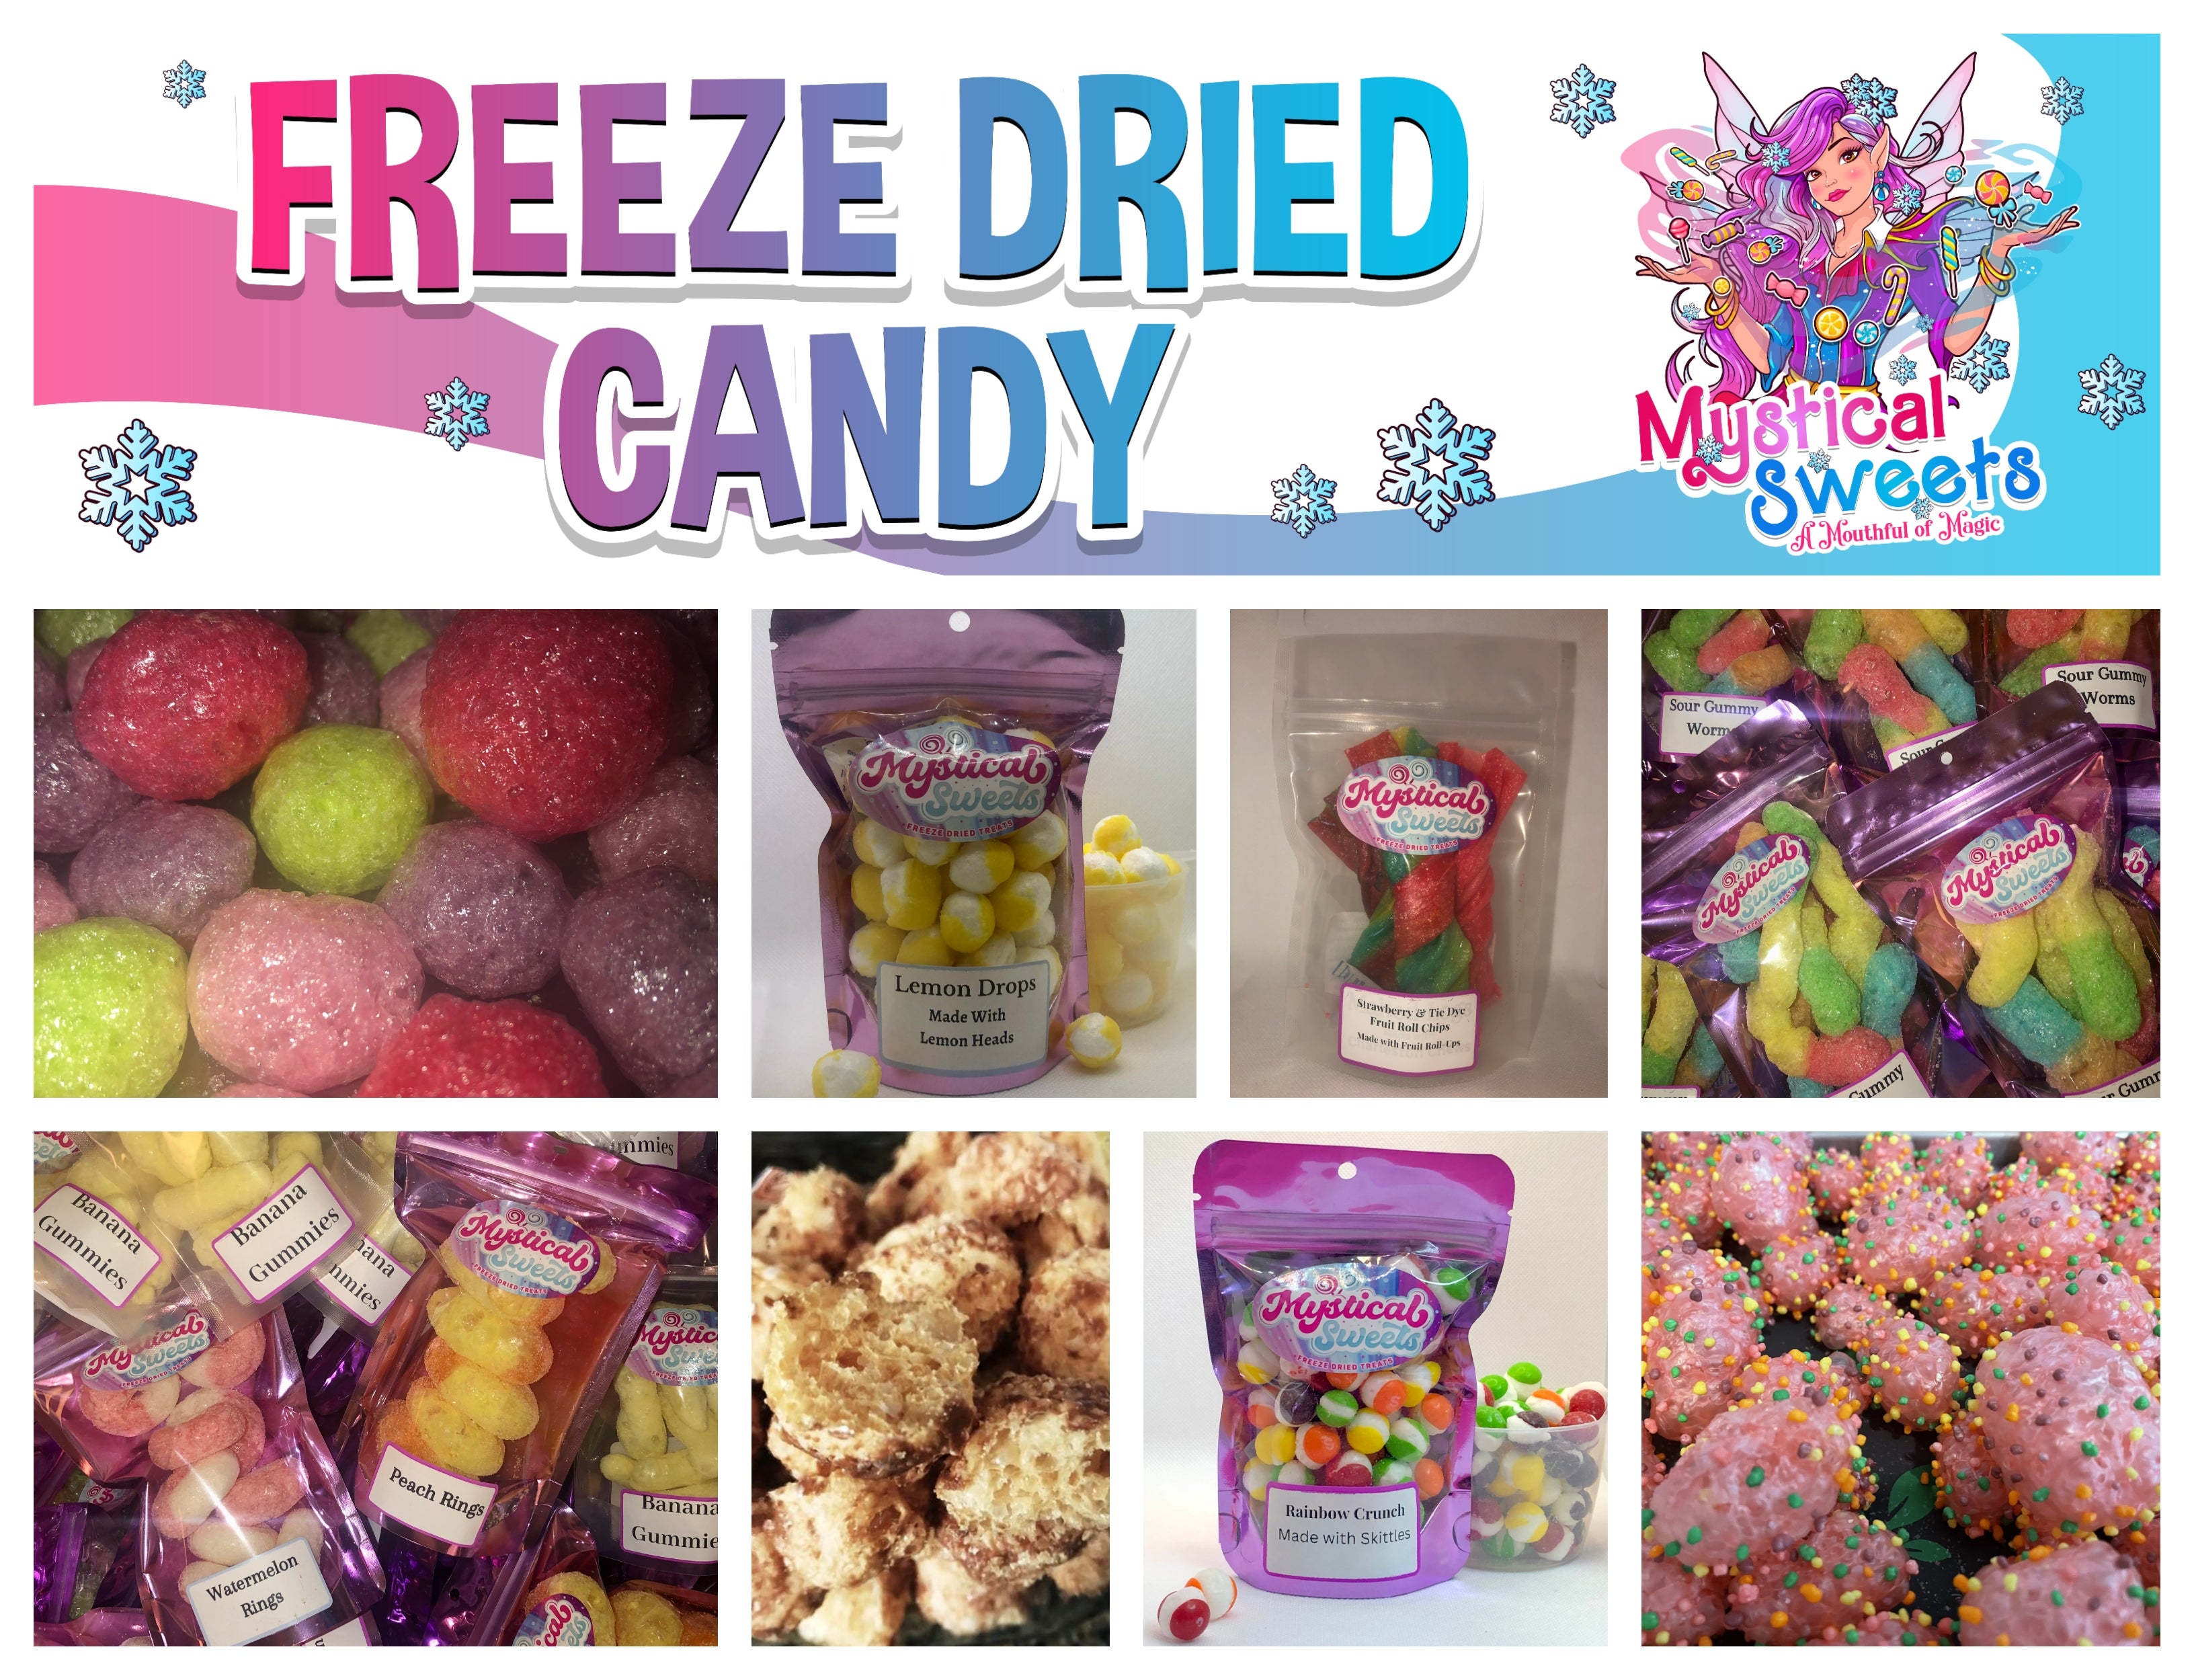 freeze dried candy, freeze dried candy michigan, freeze dried mystery box, freeze dried variety bag, wholesale freeze dried candy, white label freeze dried candy